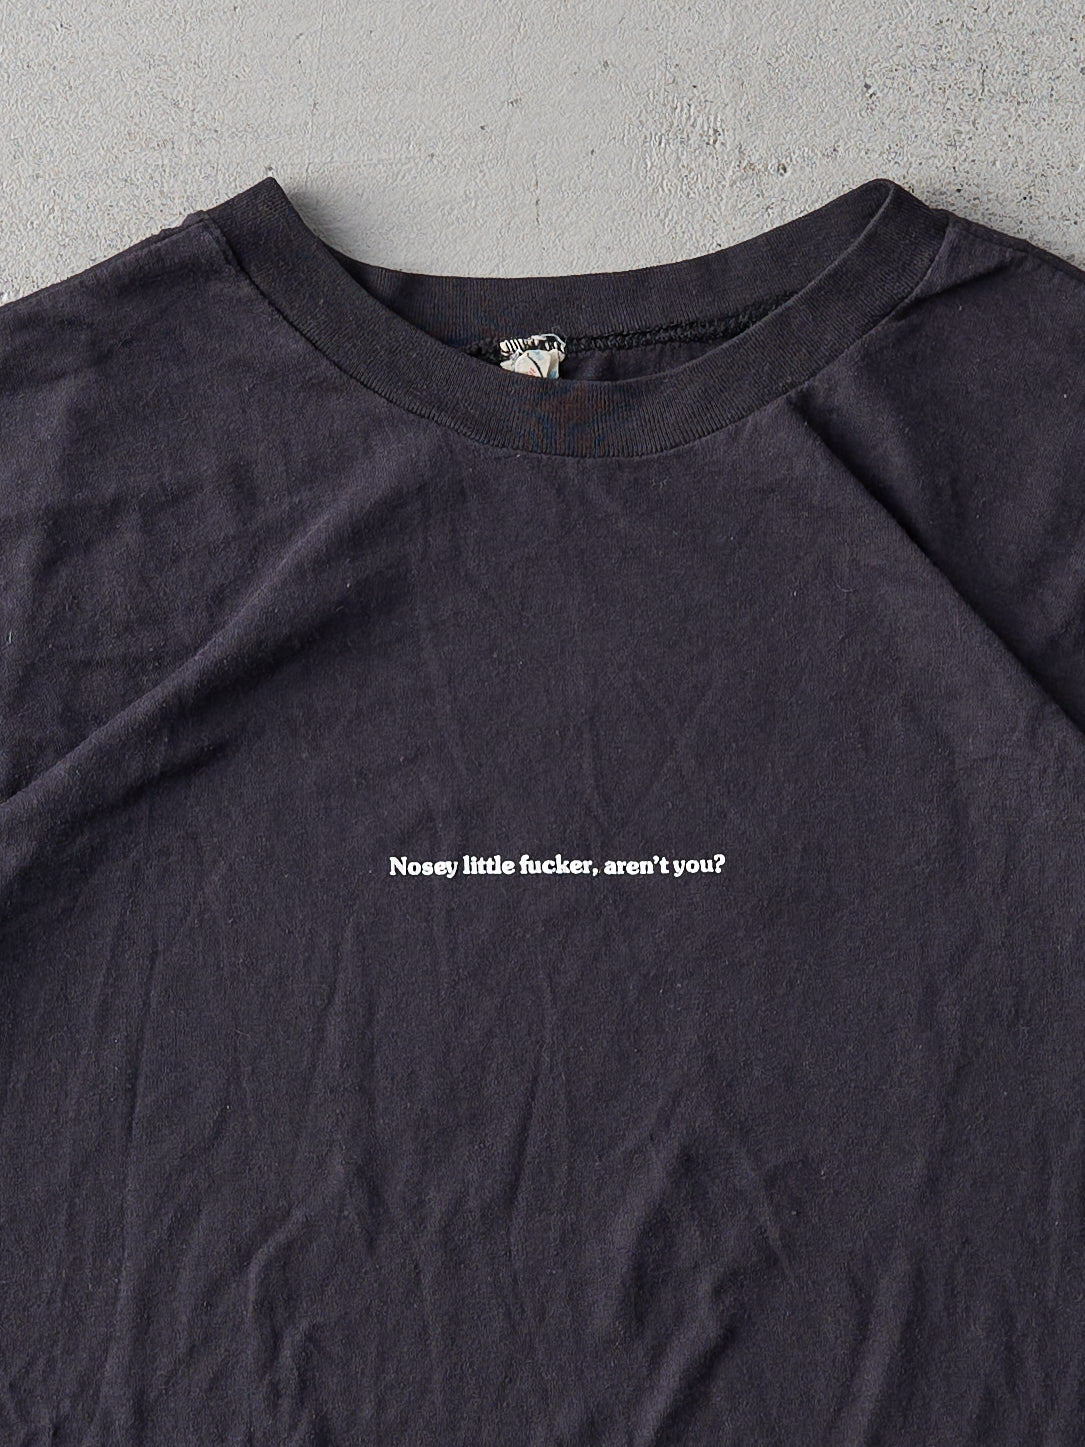 Vintage 80s Black "Nosey Little F*****, Aren't You?" Single Stitch Tee (M)